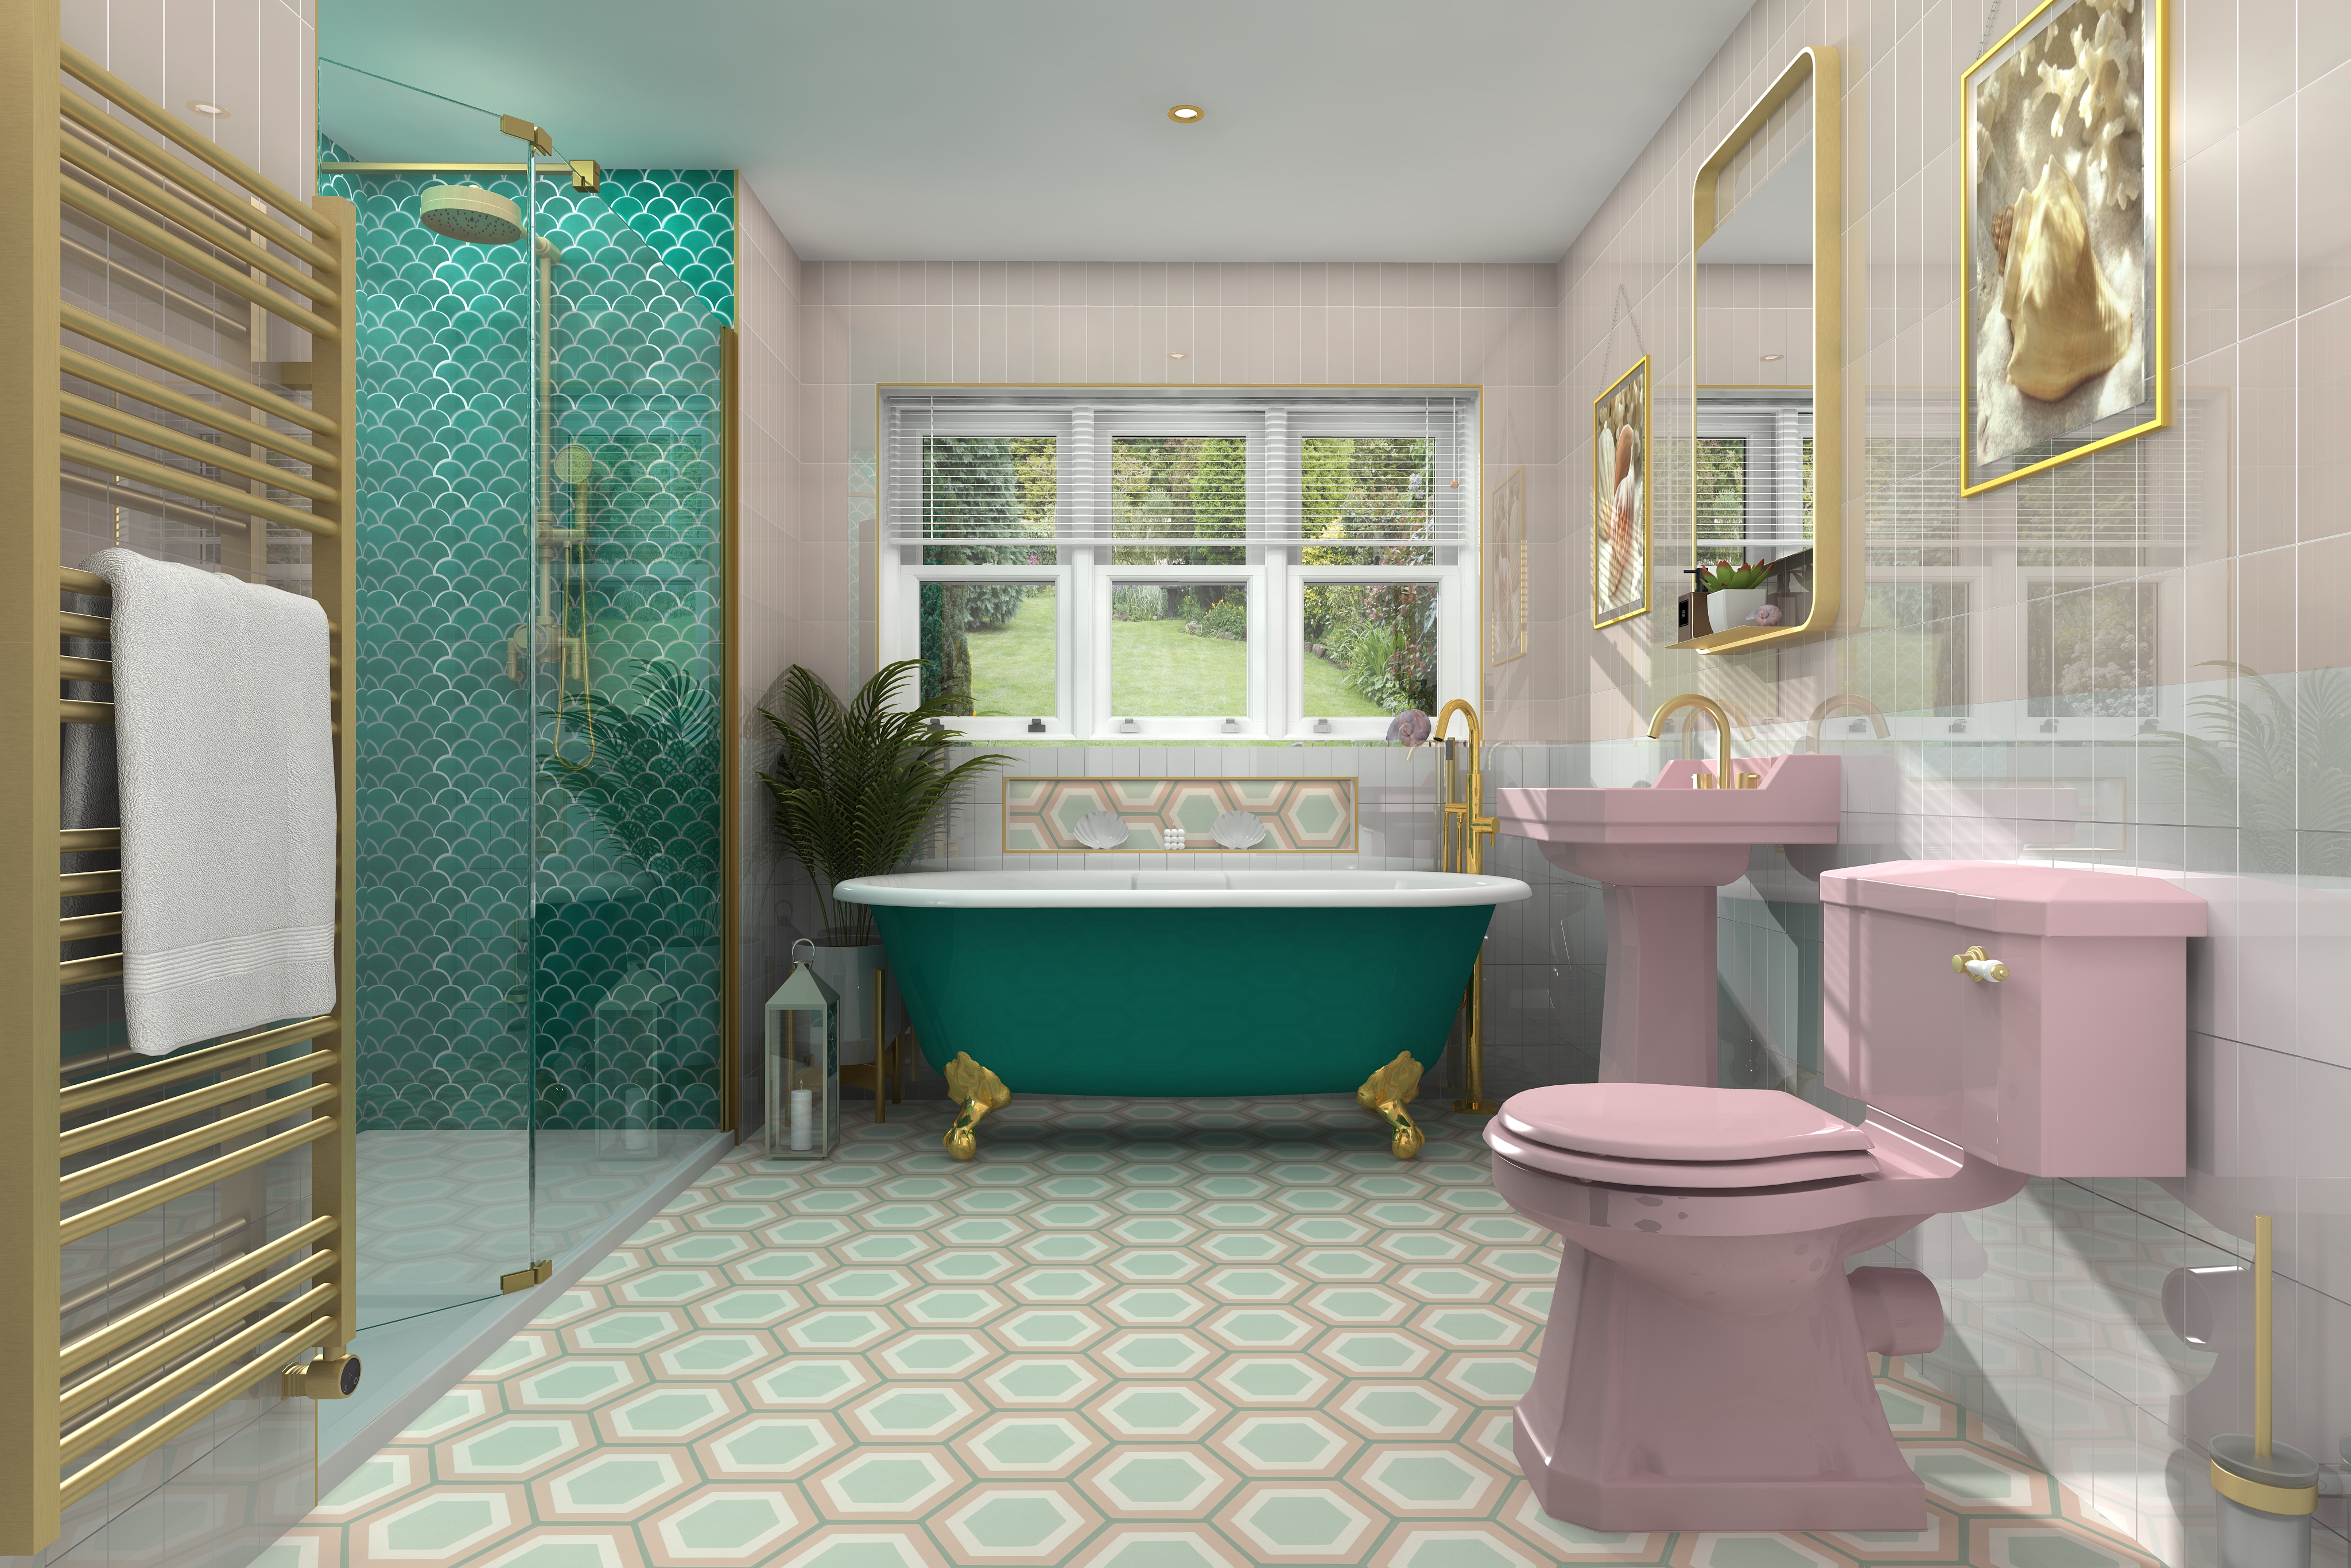 Digital lifestlyle image of the Pisces inspired bathroom, with pastel coloured hexagonal floor tiles, white rectangular wall tiles, brushed gold radiator, pastel pink close coupled toilet and pedestal basin, green freestanding bath with gold clawfeet and gold floorstanding bath tap and handset shower attachement